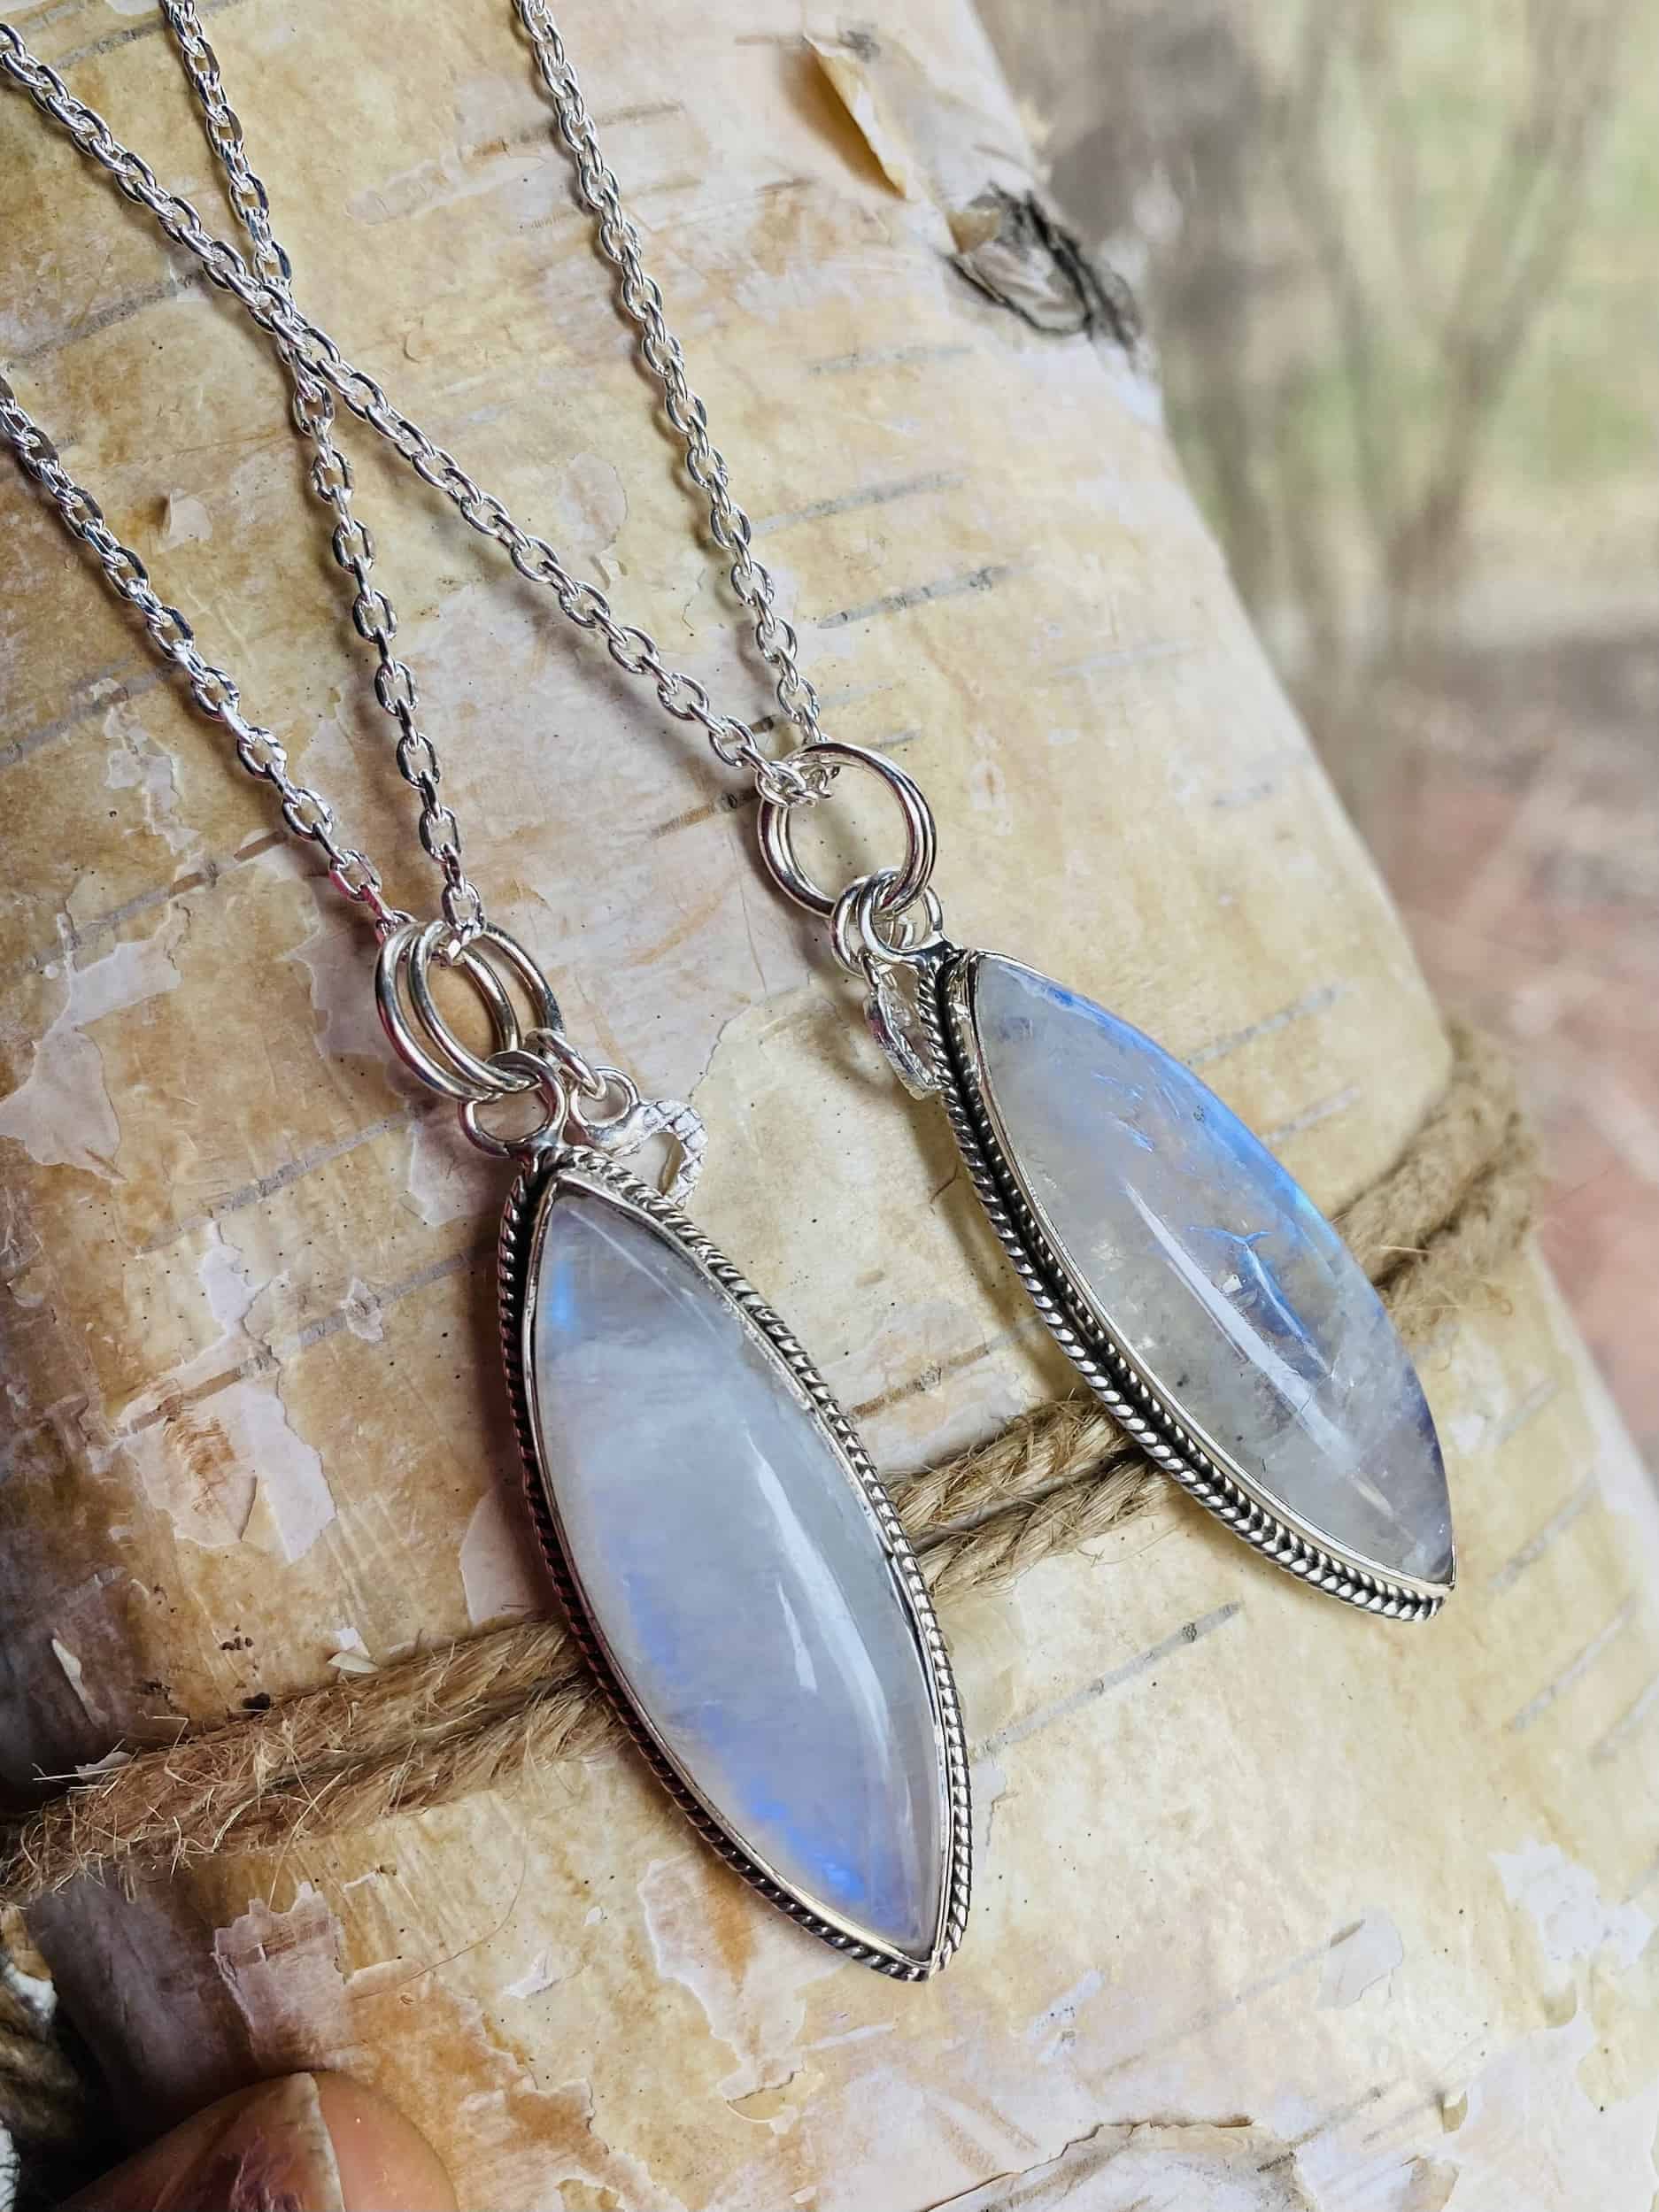 This Moonstone eye pendant necklace sterling silver by Earth Karma is made with love by EARTH KARMA! Shop more unique gift ideas today with Spots Initiatives, the best way to support creators.